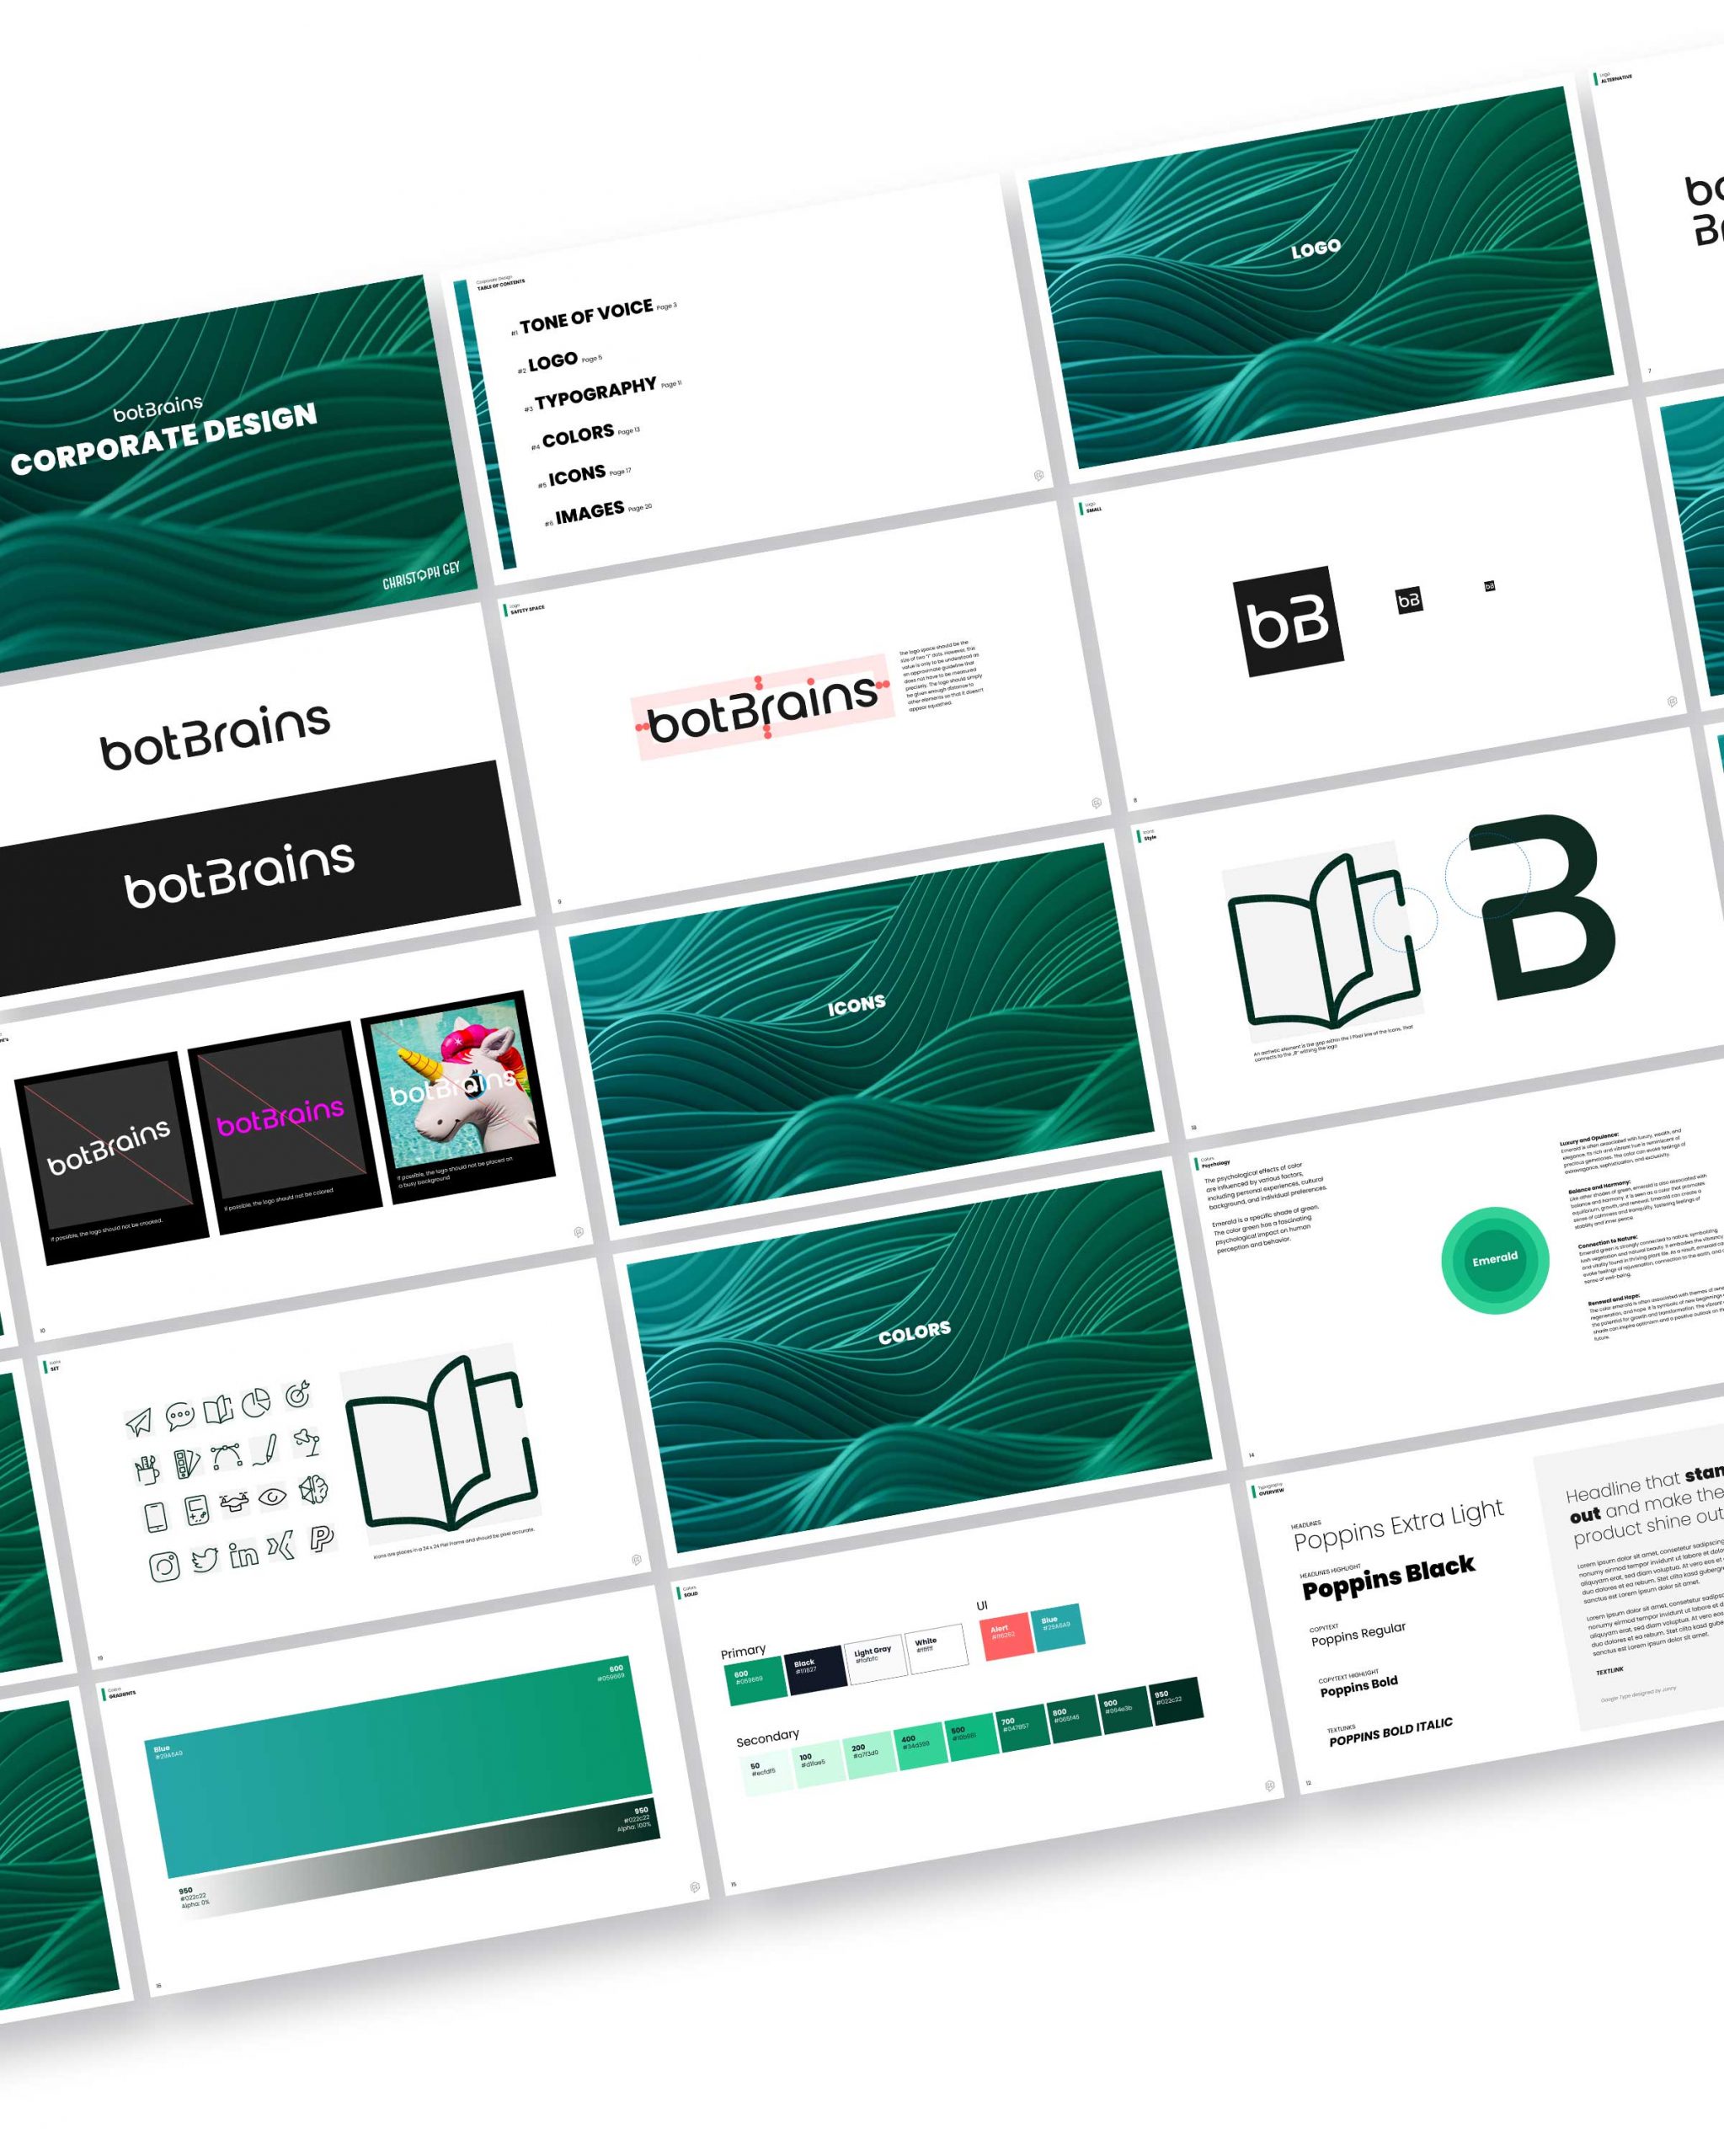 botBrains Corporate Design by the freelance art director Christoph Gey from Leipzig, Germany